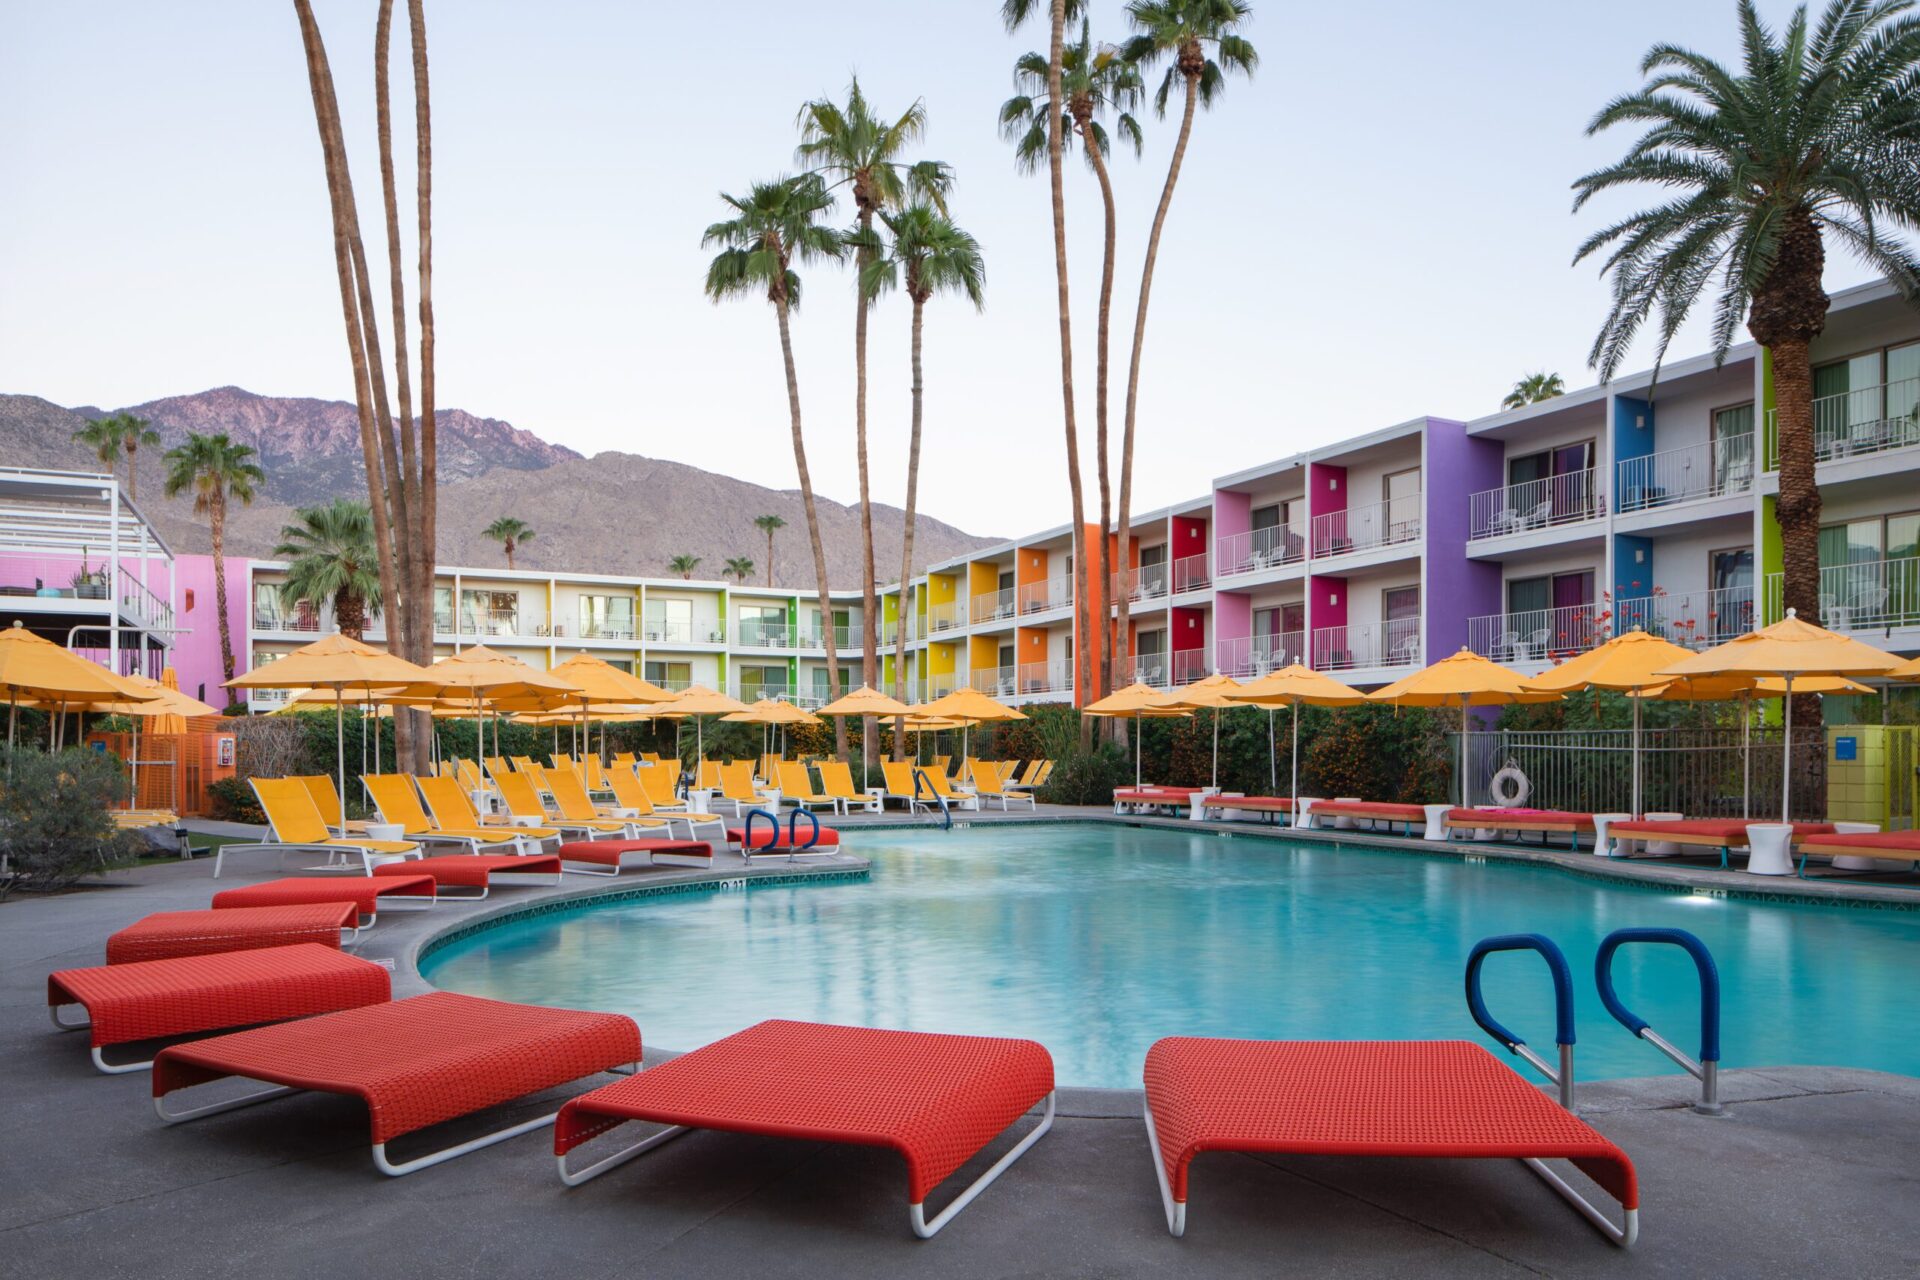 The Saguaro Palm Springs pool and exterior